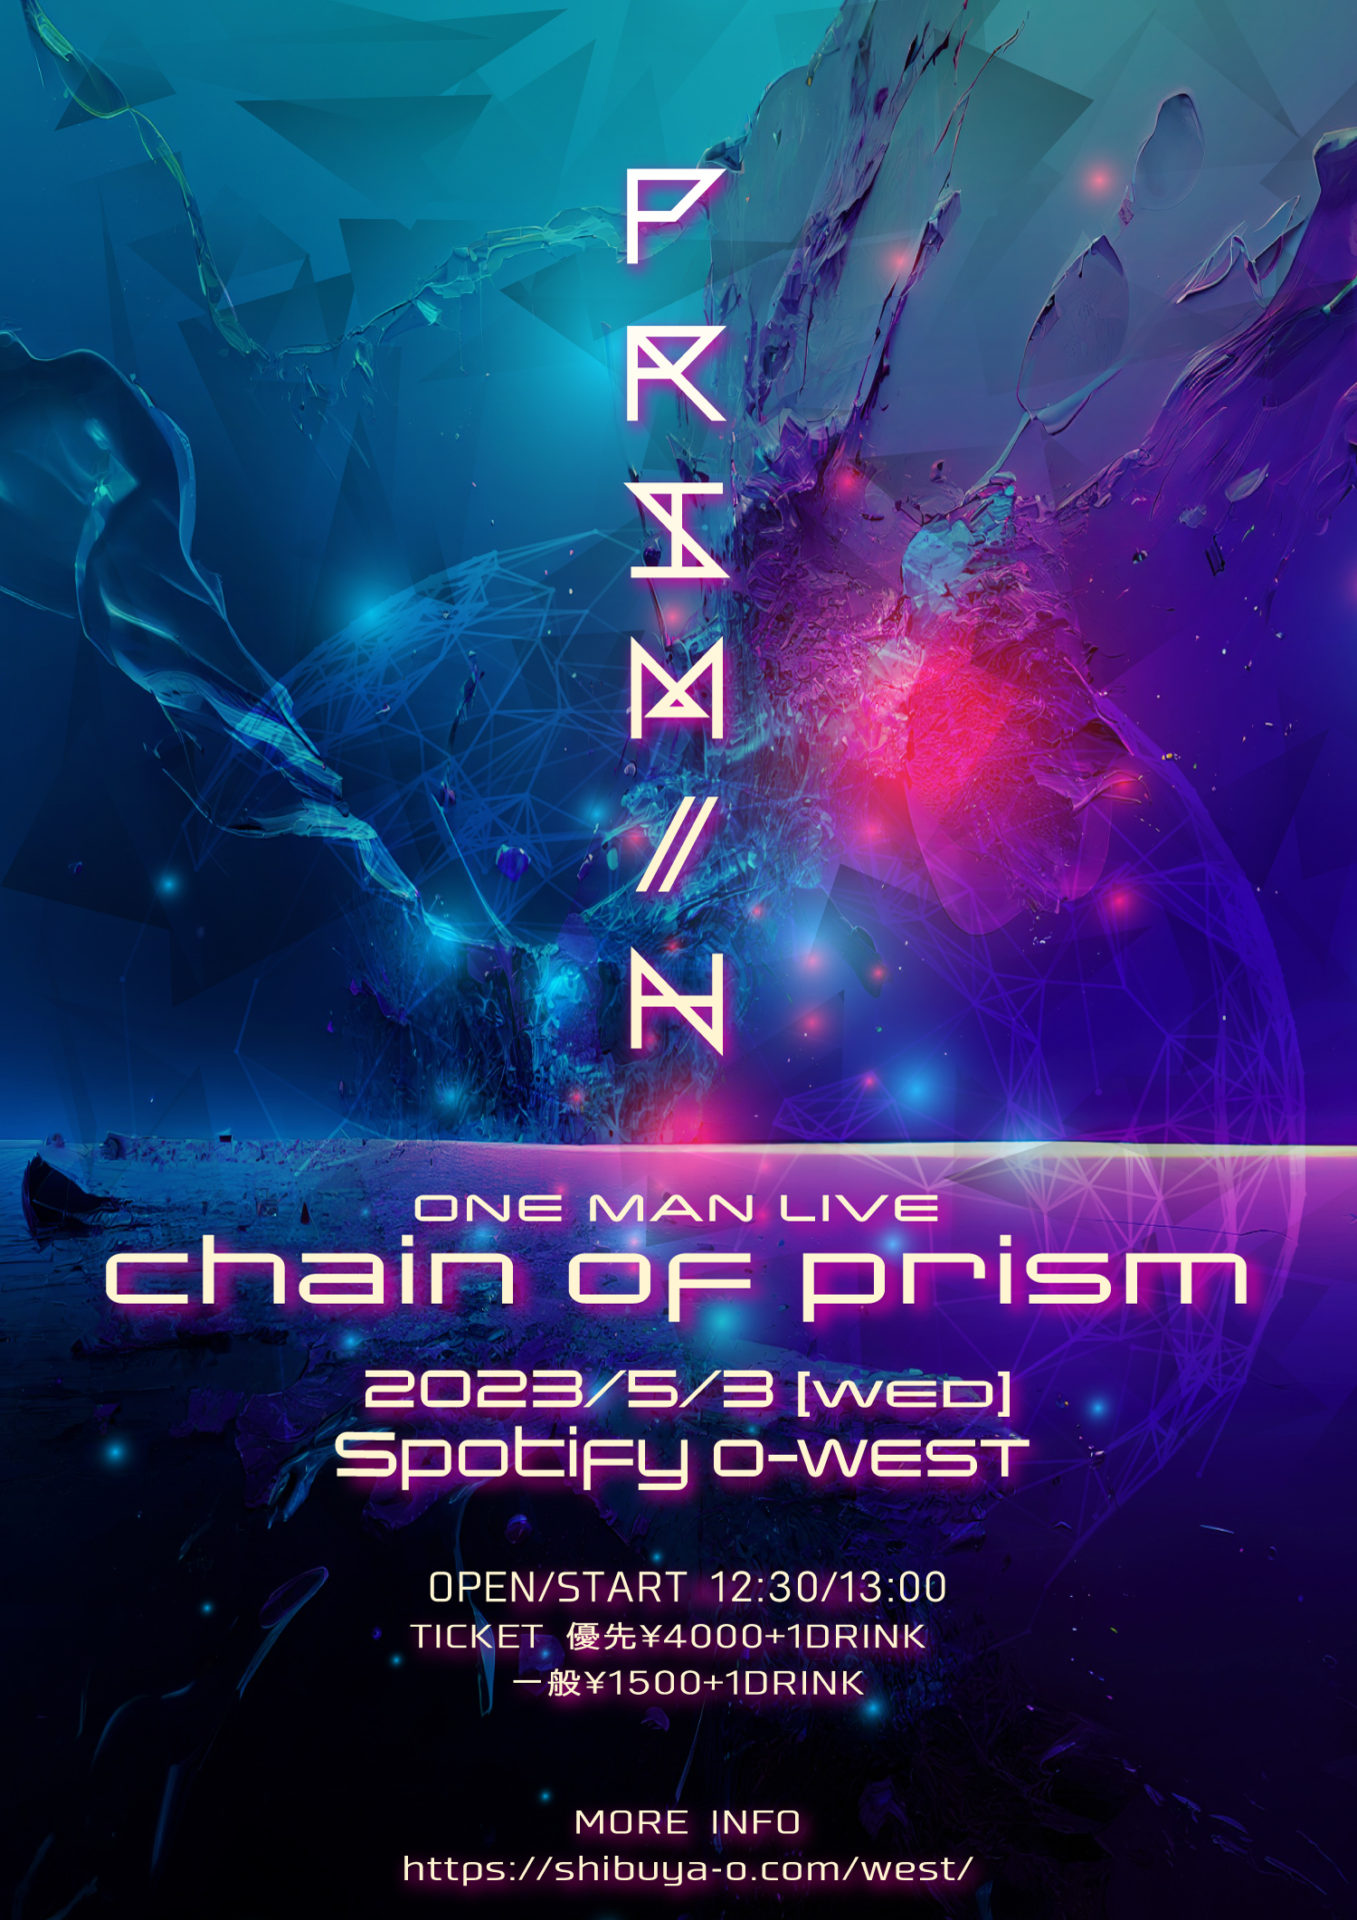 chain of prism